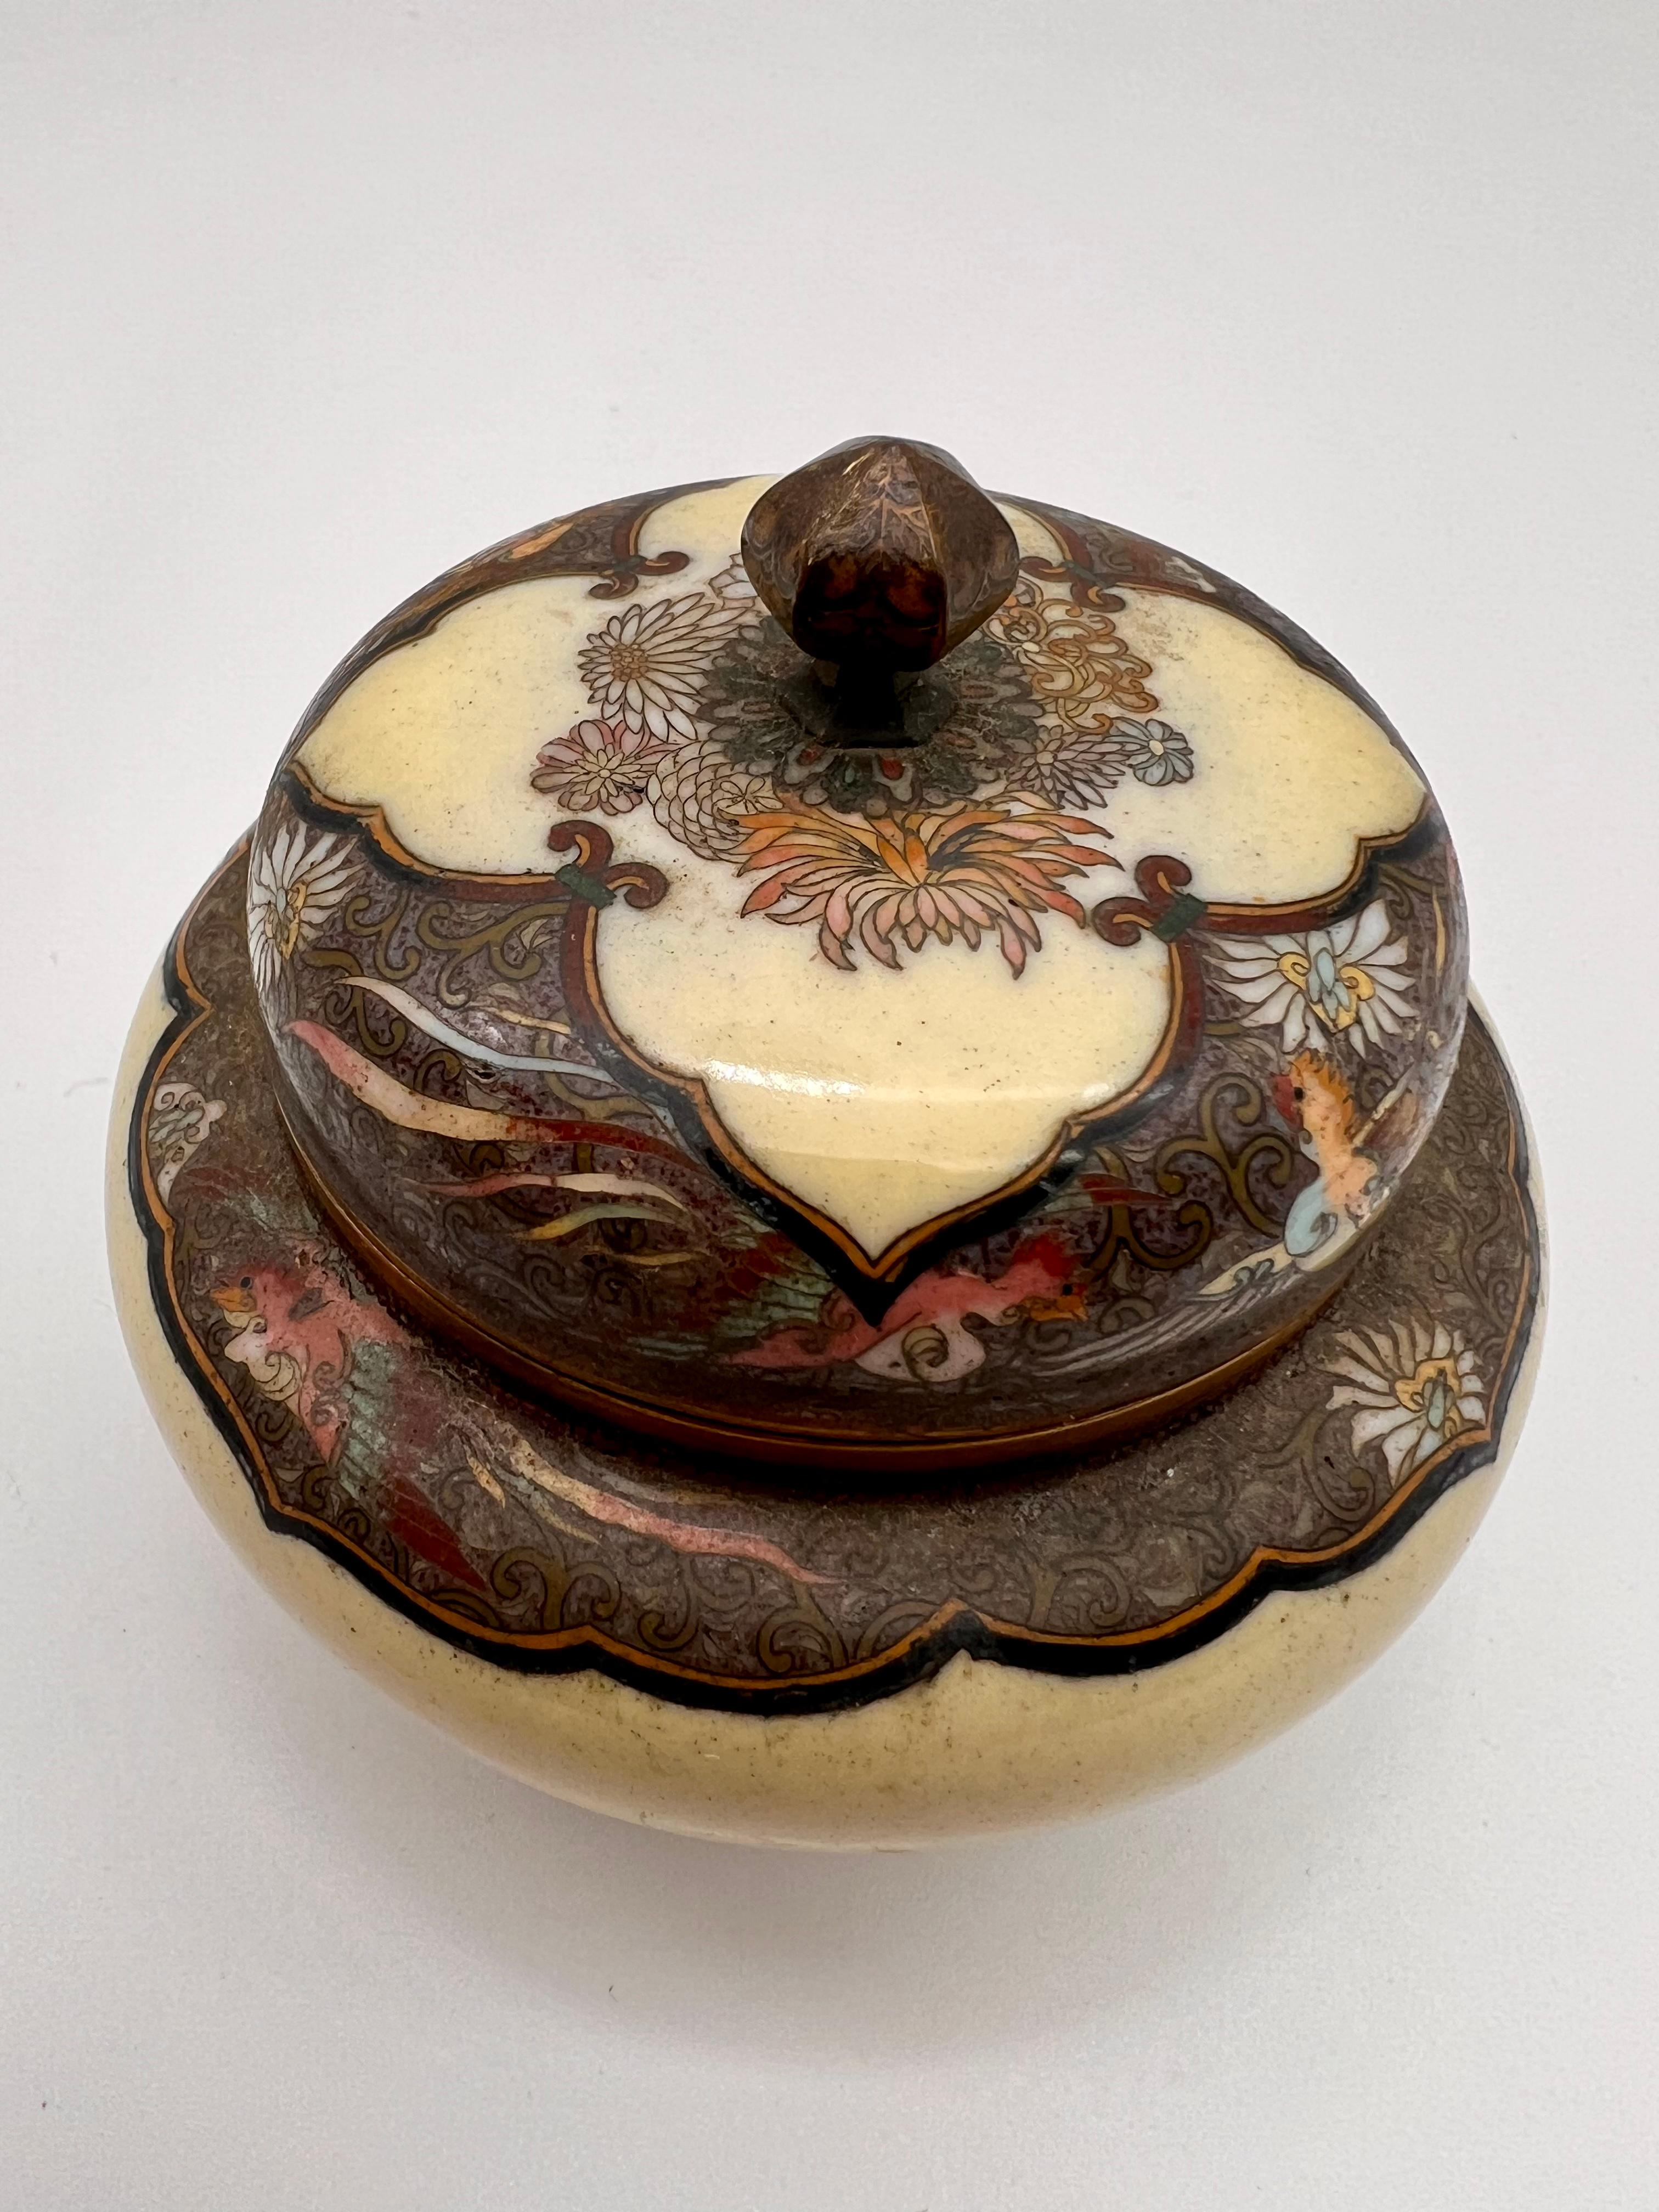 Exquisite Cloisonné Enamel Vase and Cover in the Manner of Namikawa Yasuyuki For Sale 2